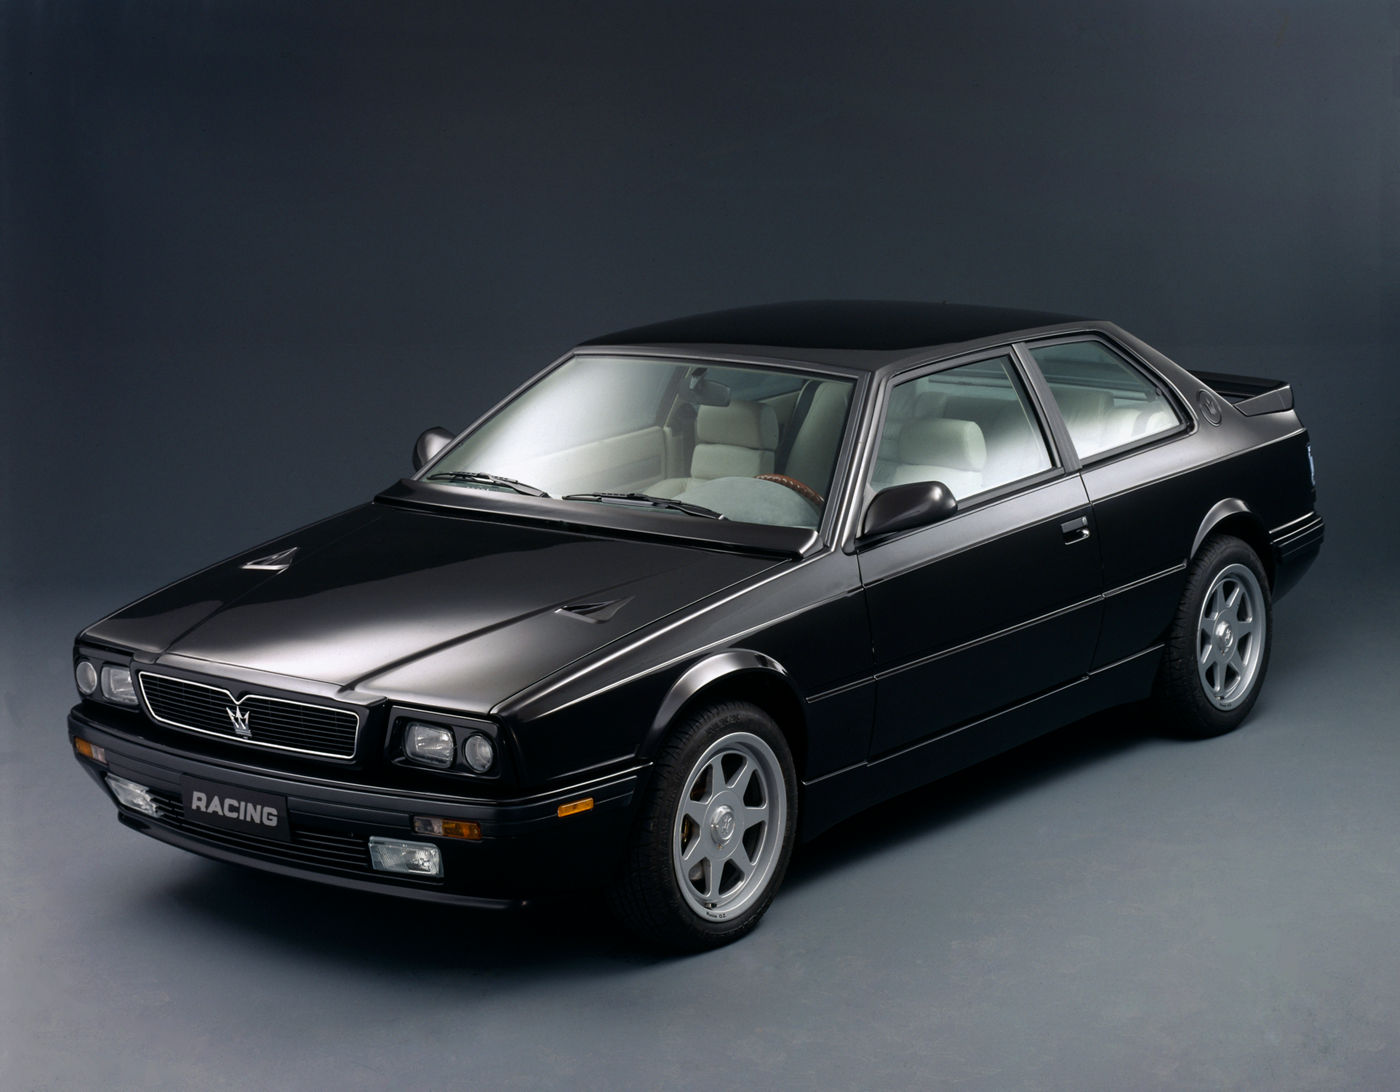 1990 Maserati Racing - exterior of the classic sports car model in black